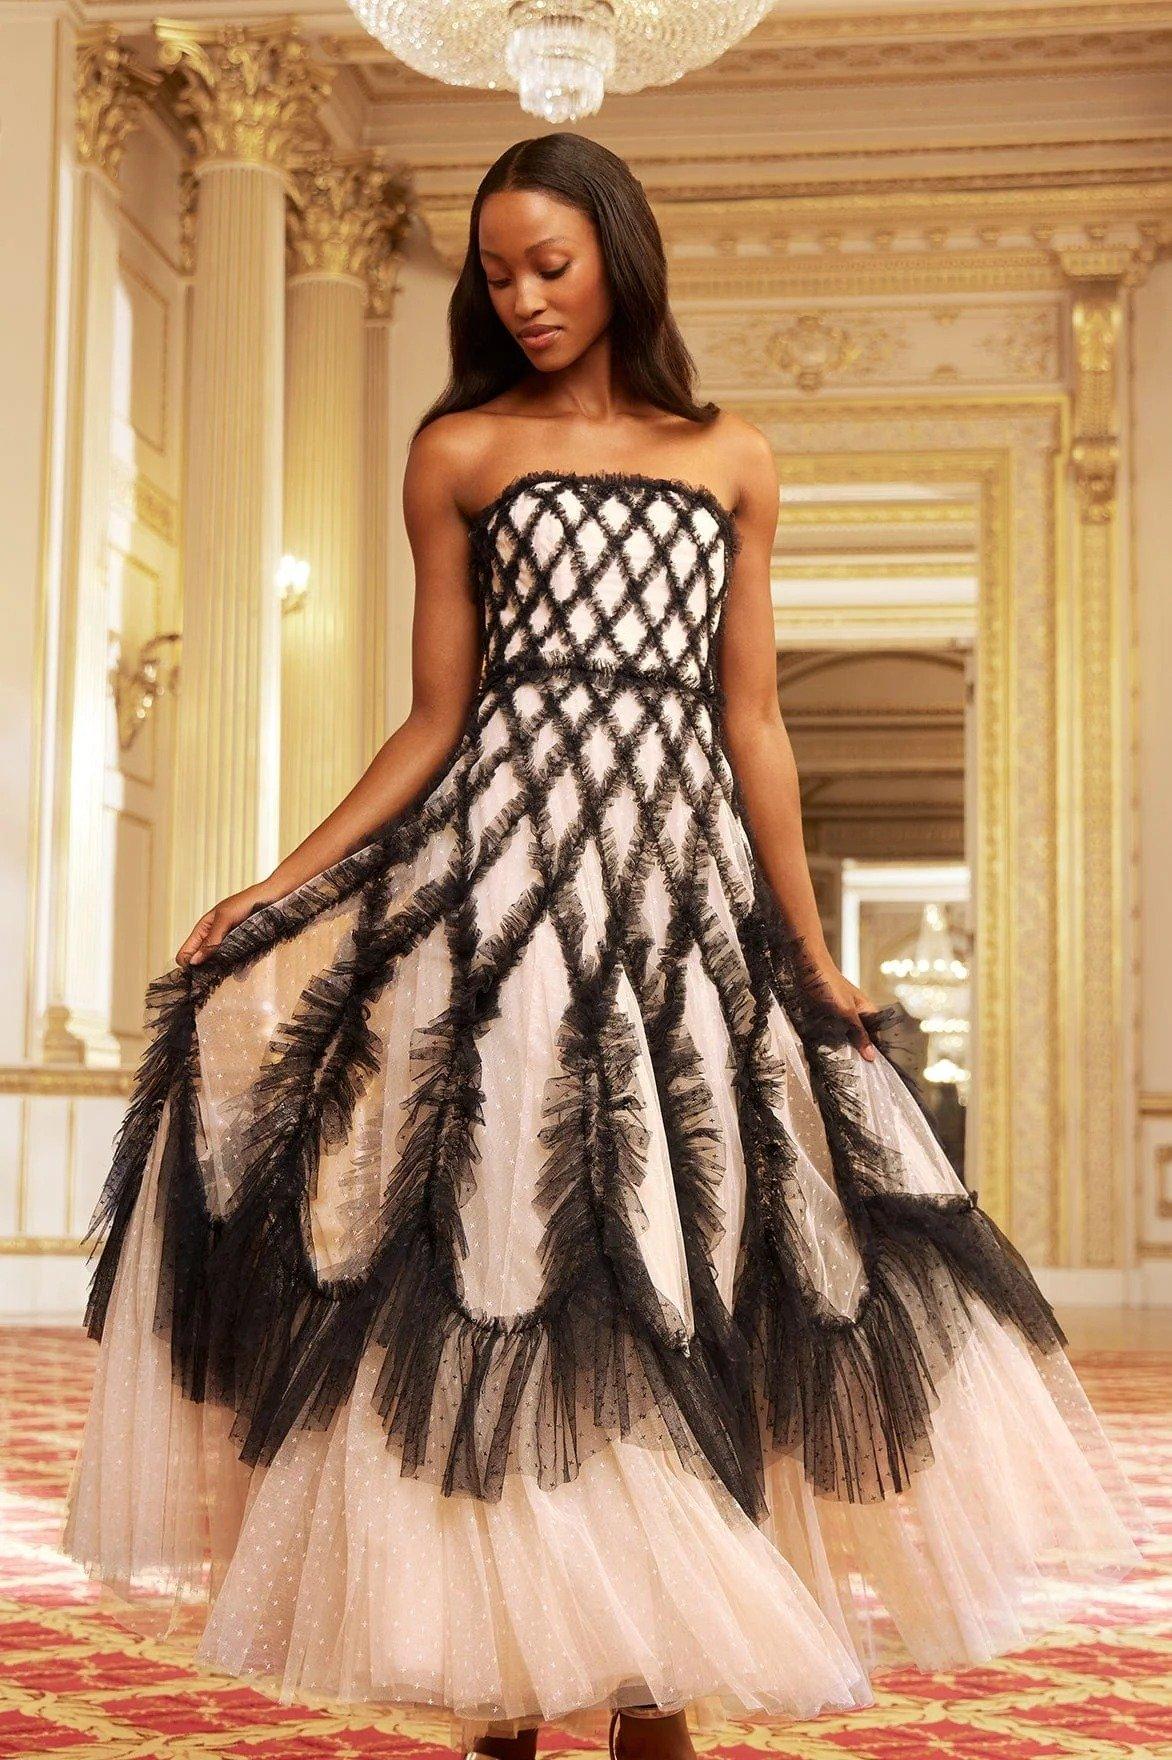 21 Black Wedding Dresses for Couples Who Want to be Different   hitchedcouk  hitchedcouk